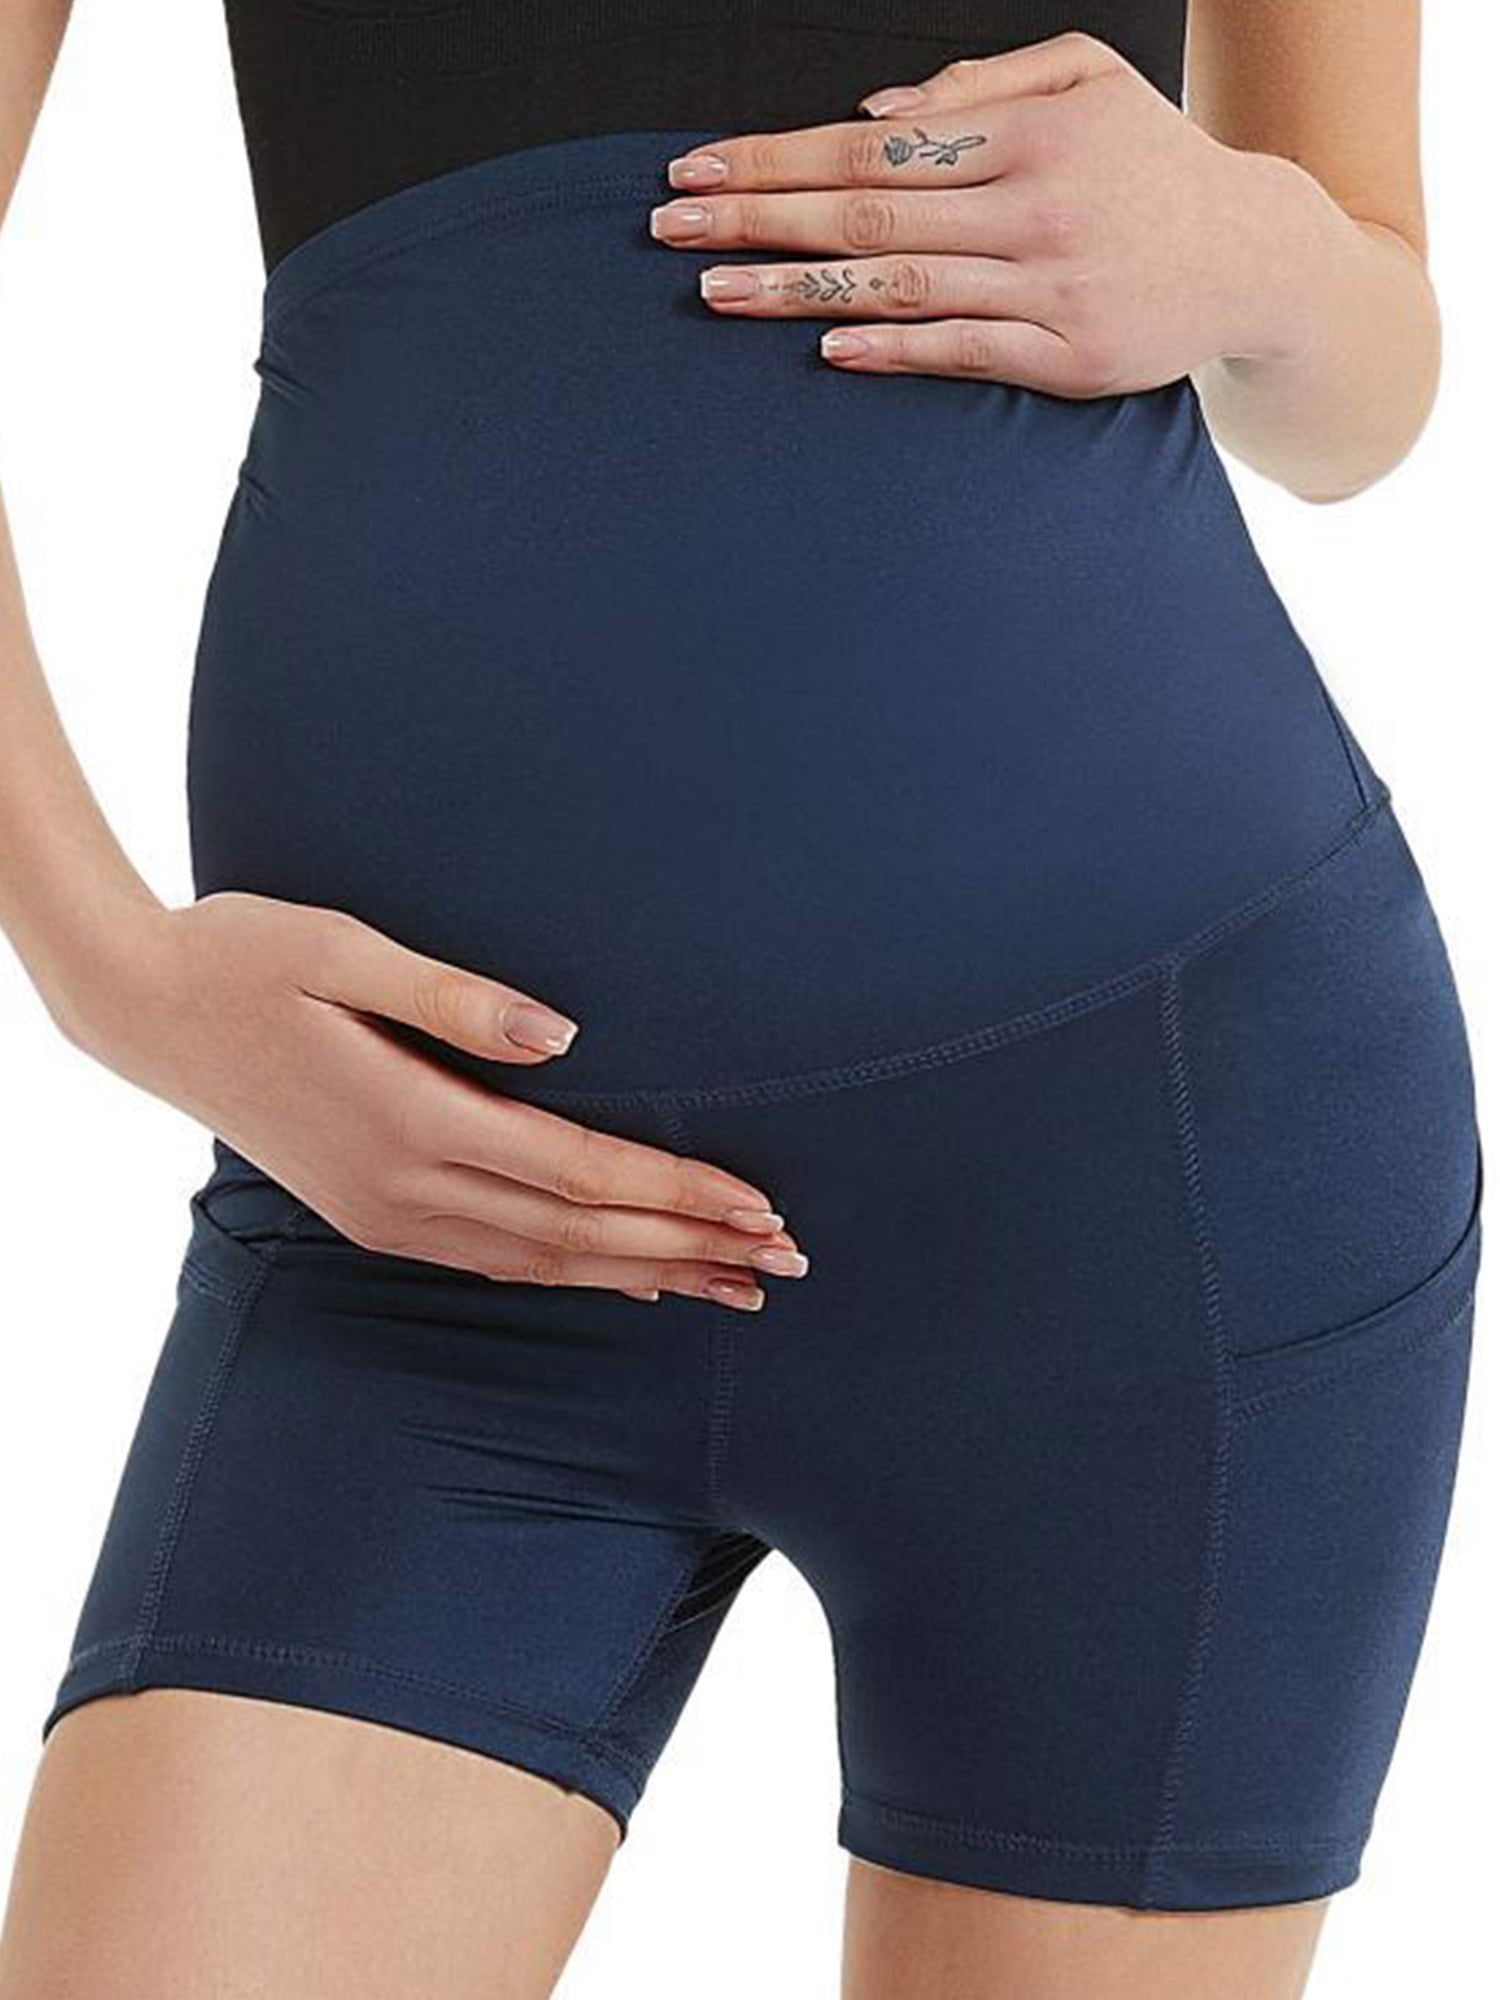 POSHDIVAH Women's Maternity Shorts Over The Belly Biker Yoga Active Pregnancy Workout Short Pants with Pockets 8 